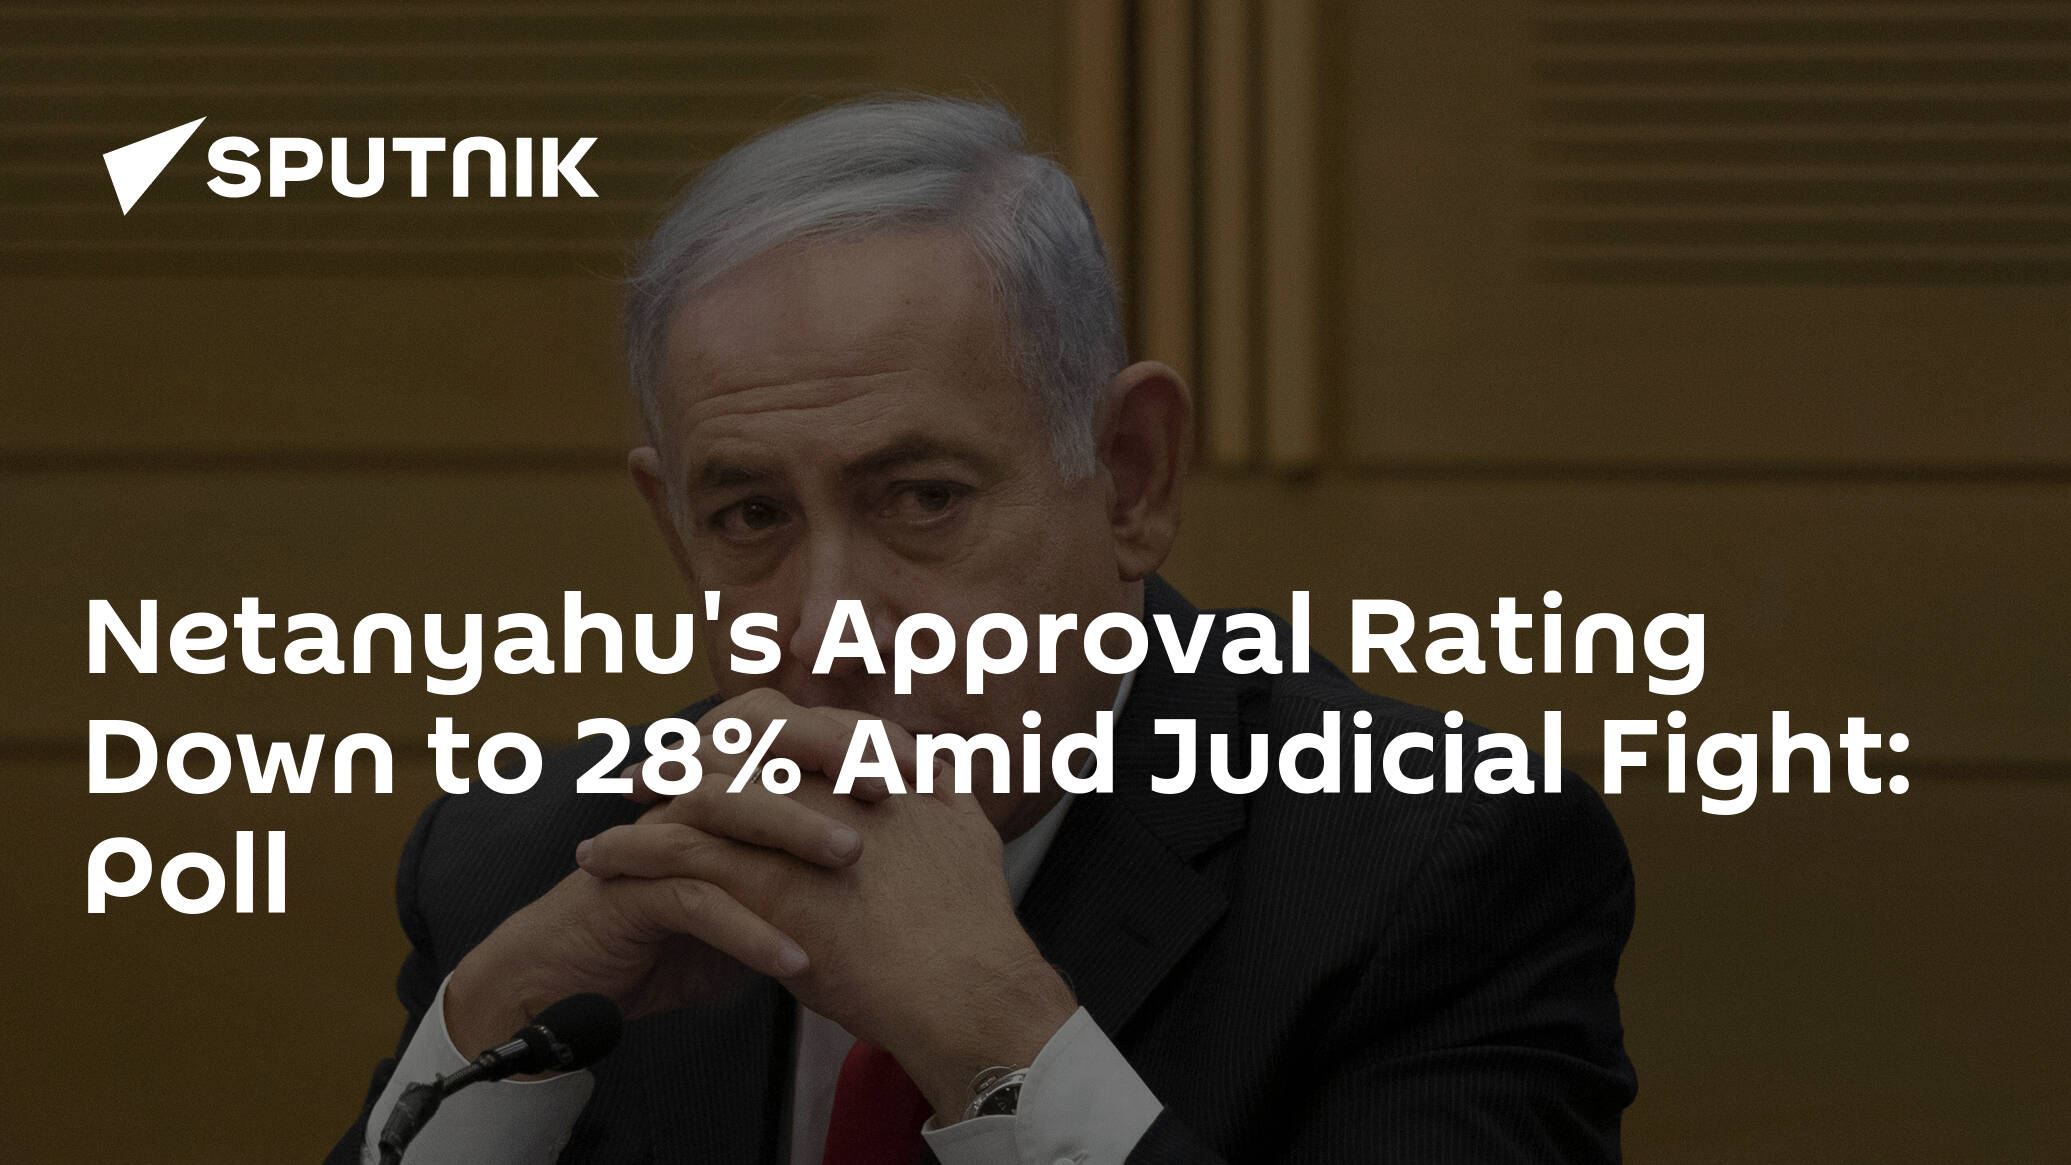 Netanyahu's Approval Rating Down to 28 Amid Judicial Fight Poll